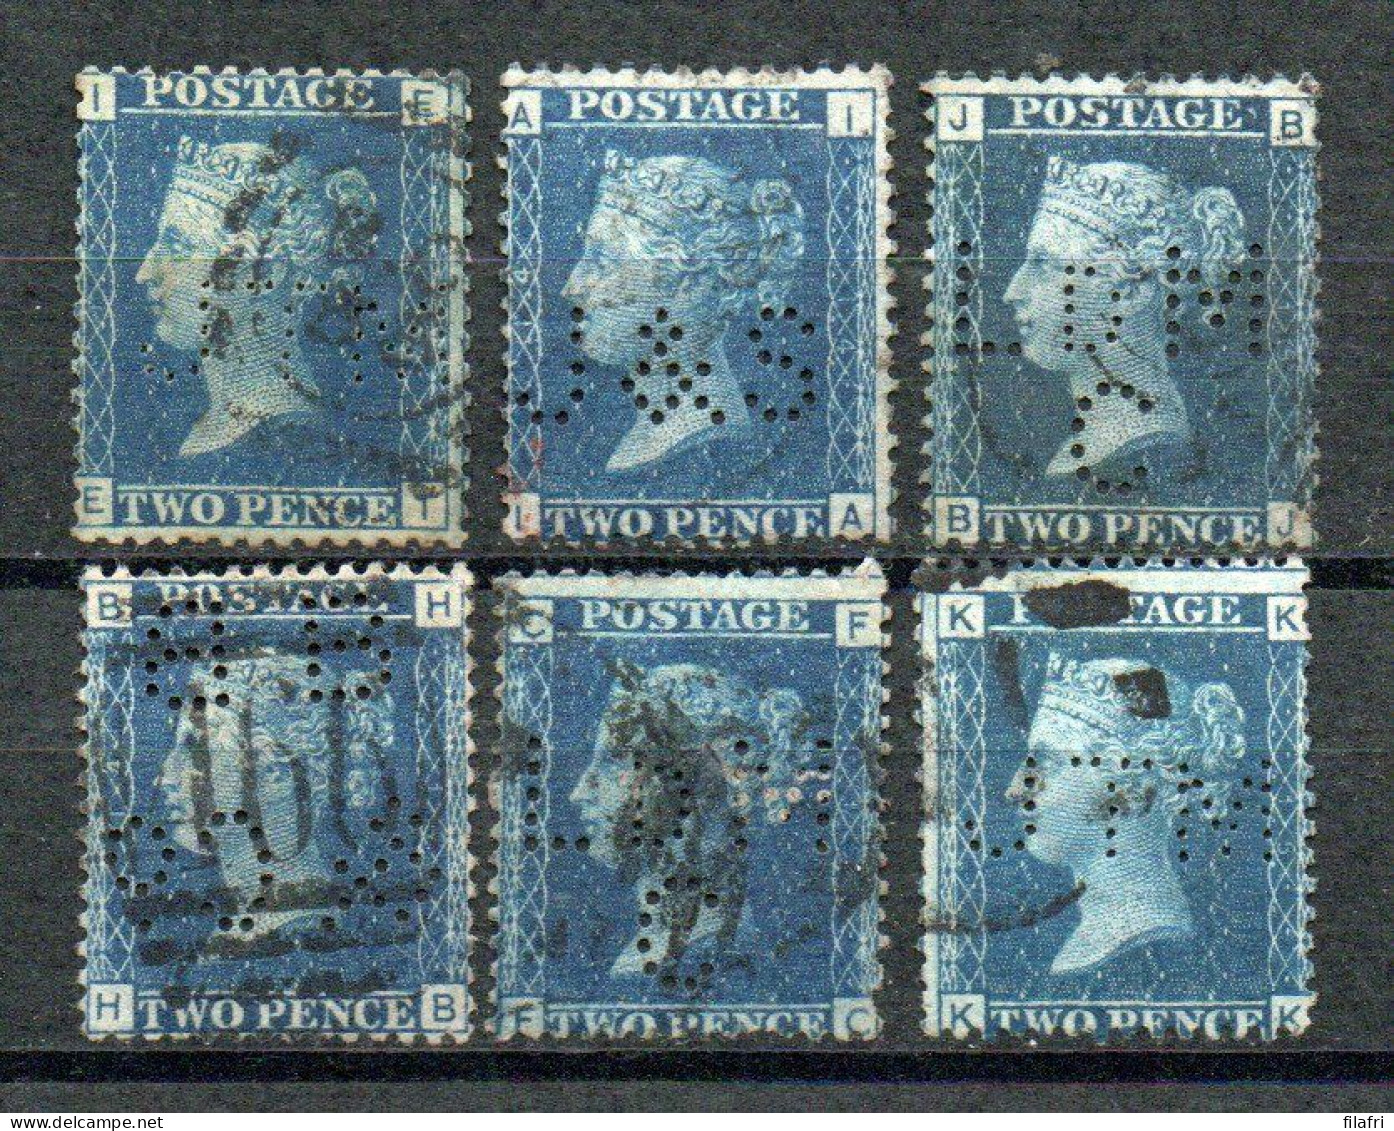 Yv 27 - 6 Perfins - Period 1840 - 1901 "Queen Victoria" : Quality Stamps (2 Scans) - Perforadas